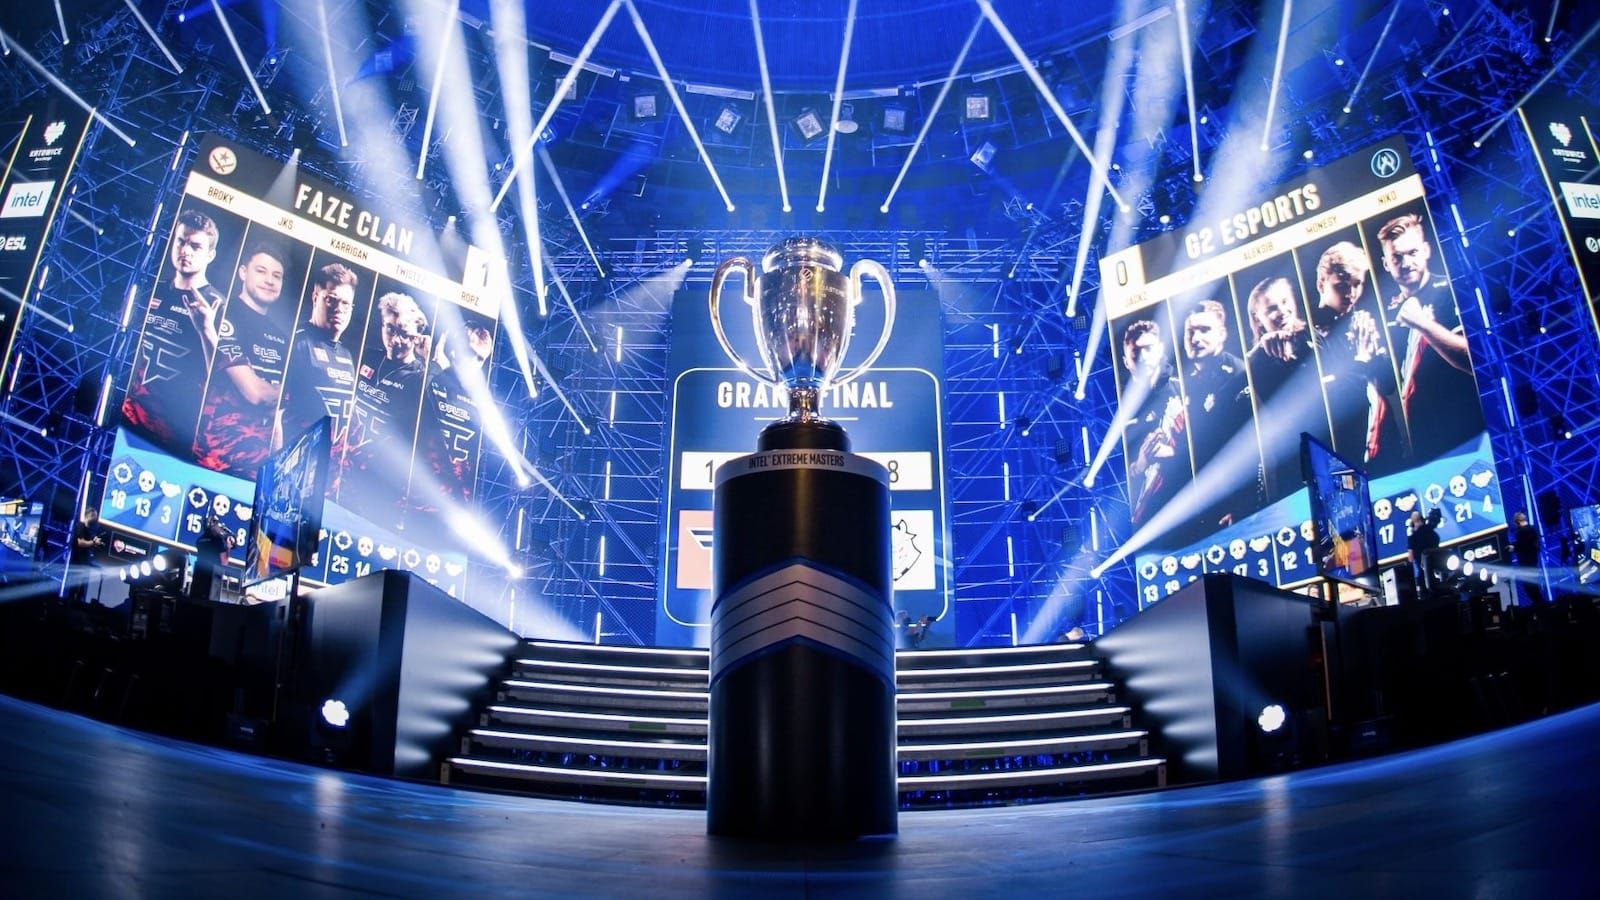 View of the stage at IEM Katowice CS:GO tournament with the trophy front and center